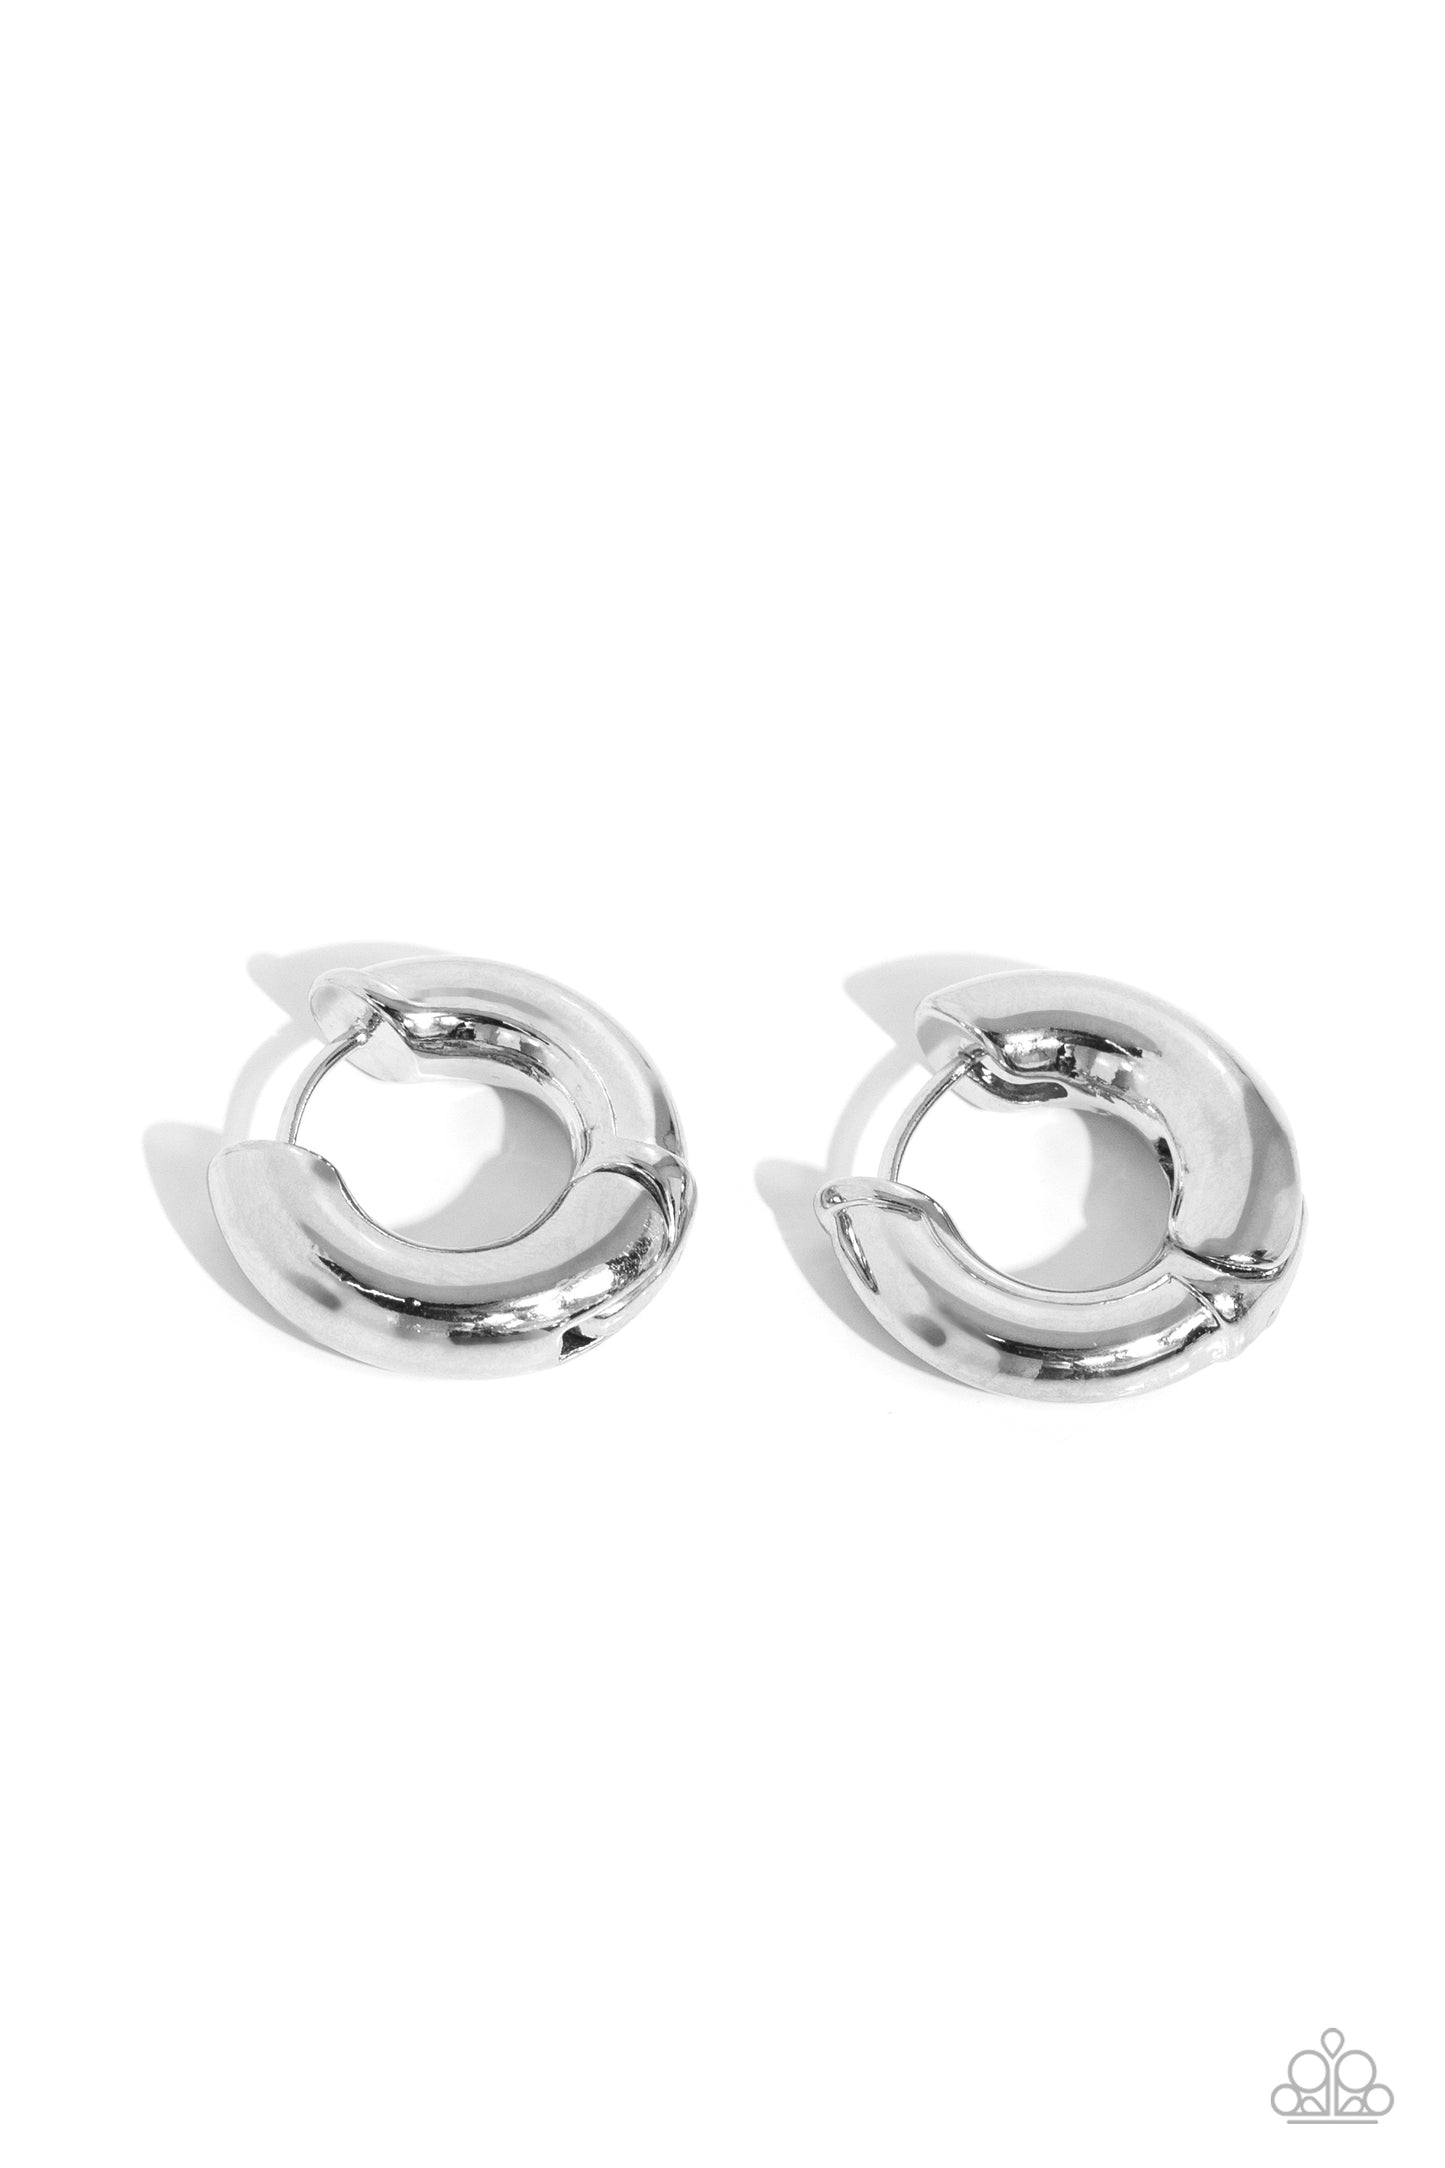 Textured Theme Silver Hoop Earrings Paparazzi